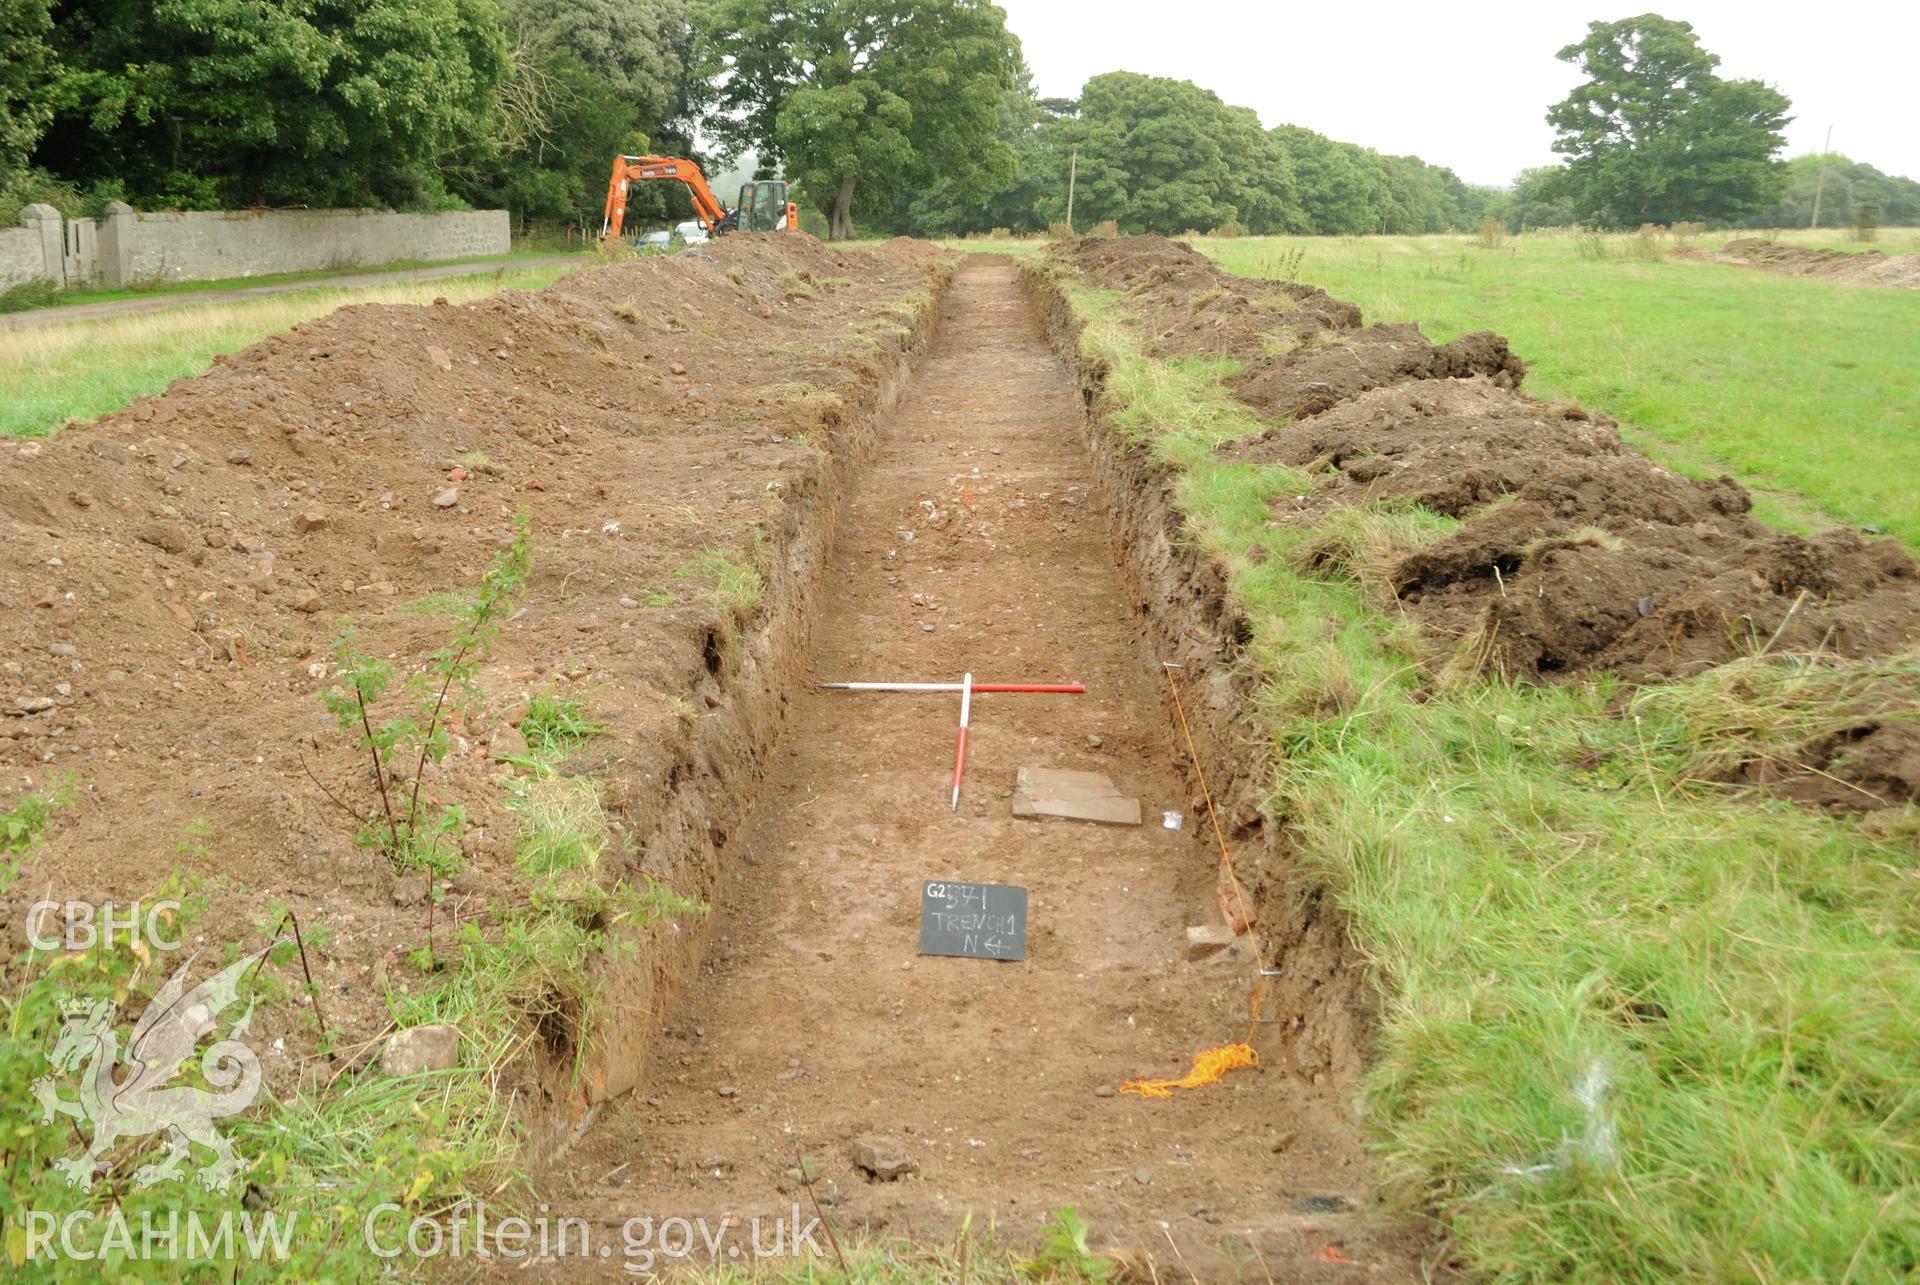 View from the west showing post excavation shot of trench 1; western terminal. Photographed during archaeological evaluation of Kinmel Park, Abergele, conducted by Gwynedd Archaeological Trust on 22nd August 2018. Project no. 2571.